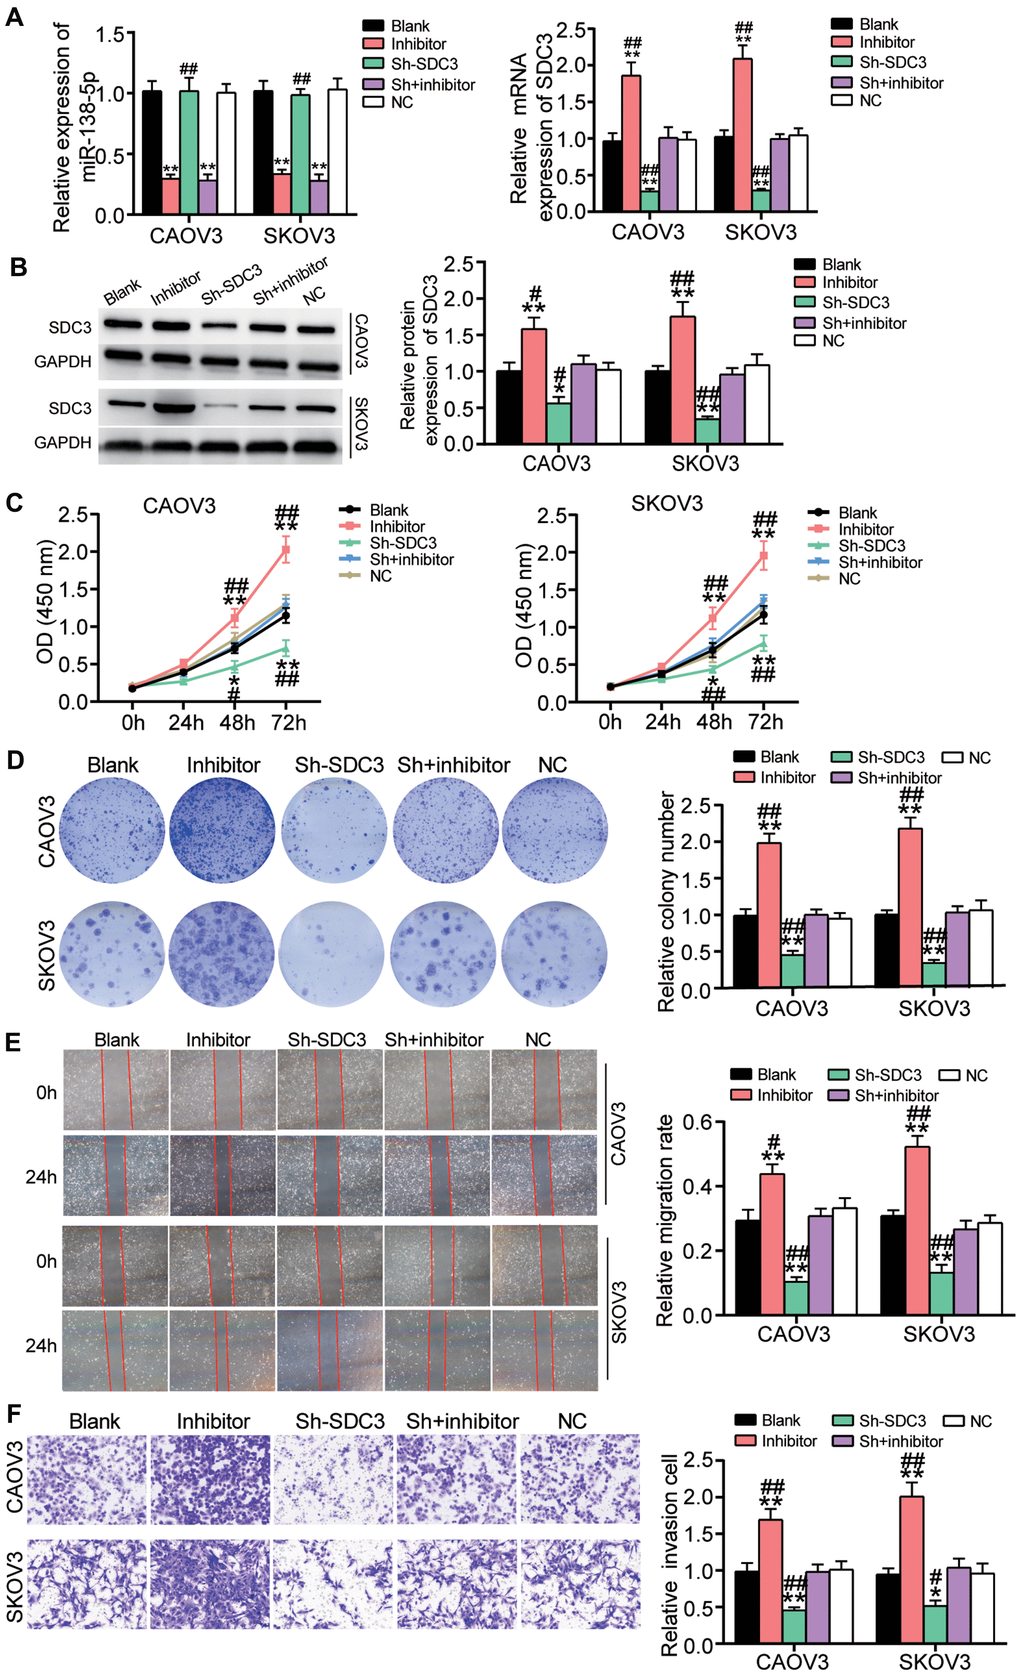 The positive effect of miR-138-5p inhibitor on OvC progression was relieved by SDC3 silence. (A) The high transfection efficiency of sh-SDC3 and miR-138-5p inhibitor was detected by qRT-PCR in CAOV3 and SKOV3 cells. (B) The high transfection efficiency of sh-SDC3 and miR-138-5p inhibitor was further measured by western blot analysis in CAOV3 and SKOV3 cells. (C) sh-SDC3 attenuated the promotive effect of miR-138-5p inhibitor on cell viability in CAOV3 and SKOV3 cells. (D) The positive effect of miR-138-5p inhibitor on colony formation was overturned by sh-SDC3. (E) The positive role of miR-138-5p inhibitor in cell migration was relieved by sh-SDC3. (F) The promotion effect of miR-138-5p inhibitor on cell invasion was impaired by sh-SDC3. Blank, blank control. NC, negative control. Sh, sh-SDC3. Inhibitor, miR-138-5p inhibitor. *PP##P